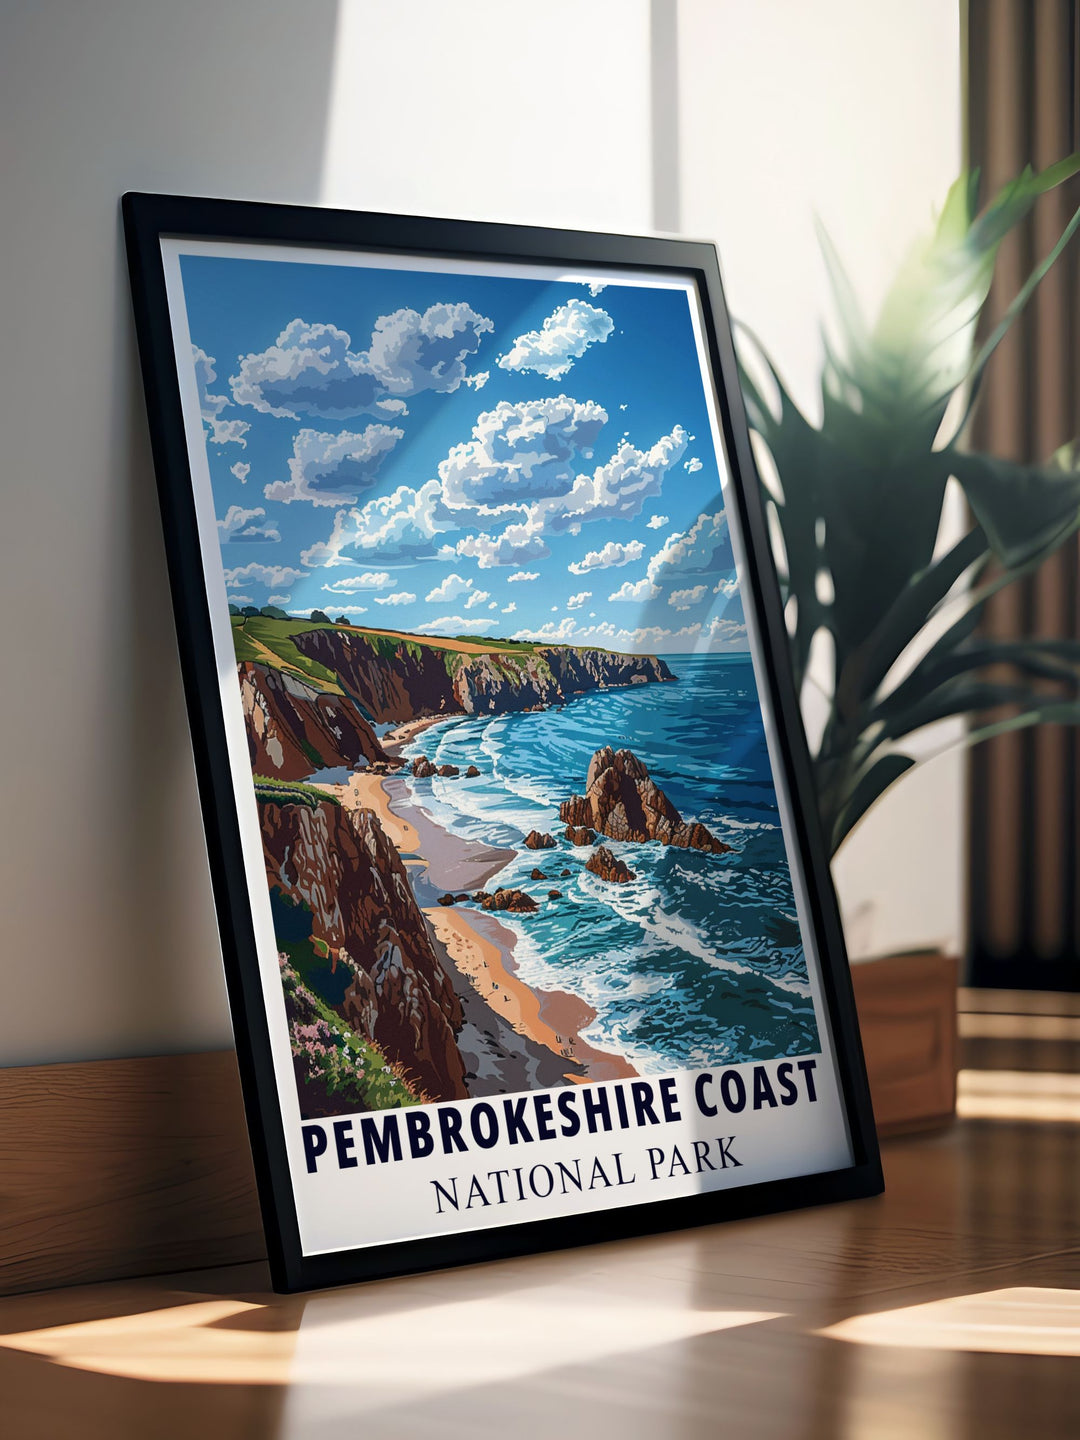 Vintage travel print of coastline in Pembrokeshire Wales highlighting the majestic landscape with Art Deco elements perfect for adding a touch of elegance to your wall art collection and celebrating the beauty of British national parks.